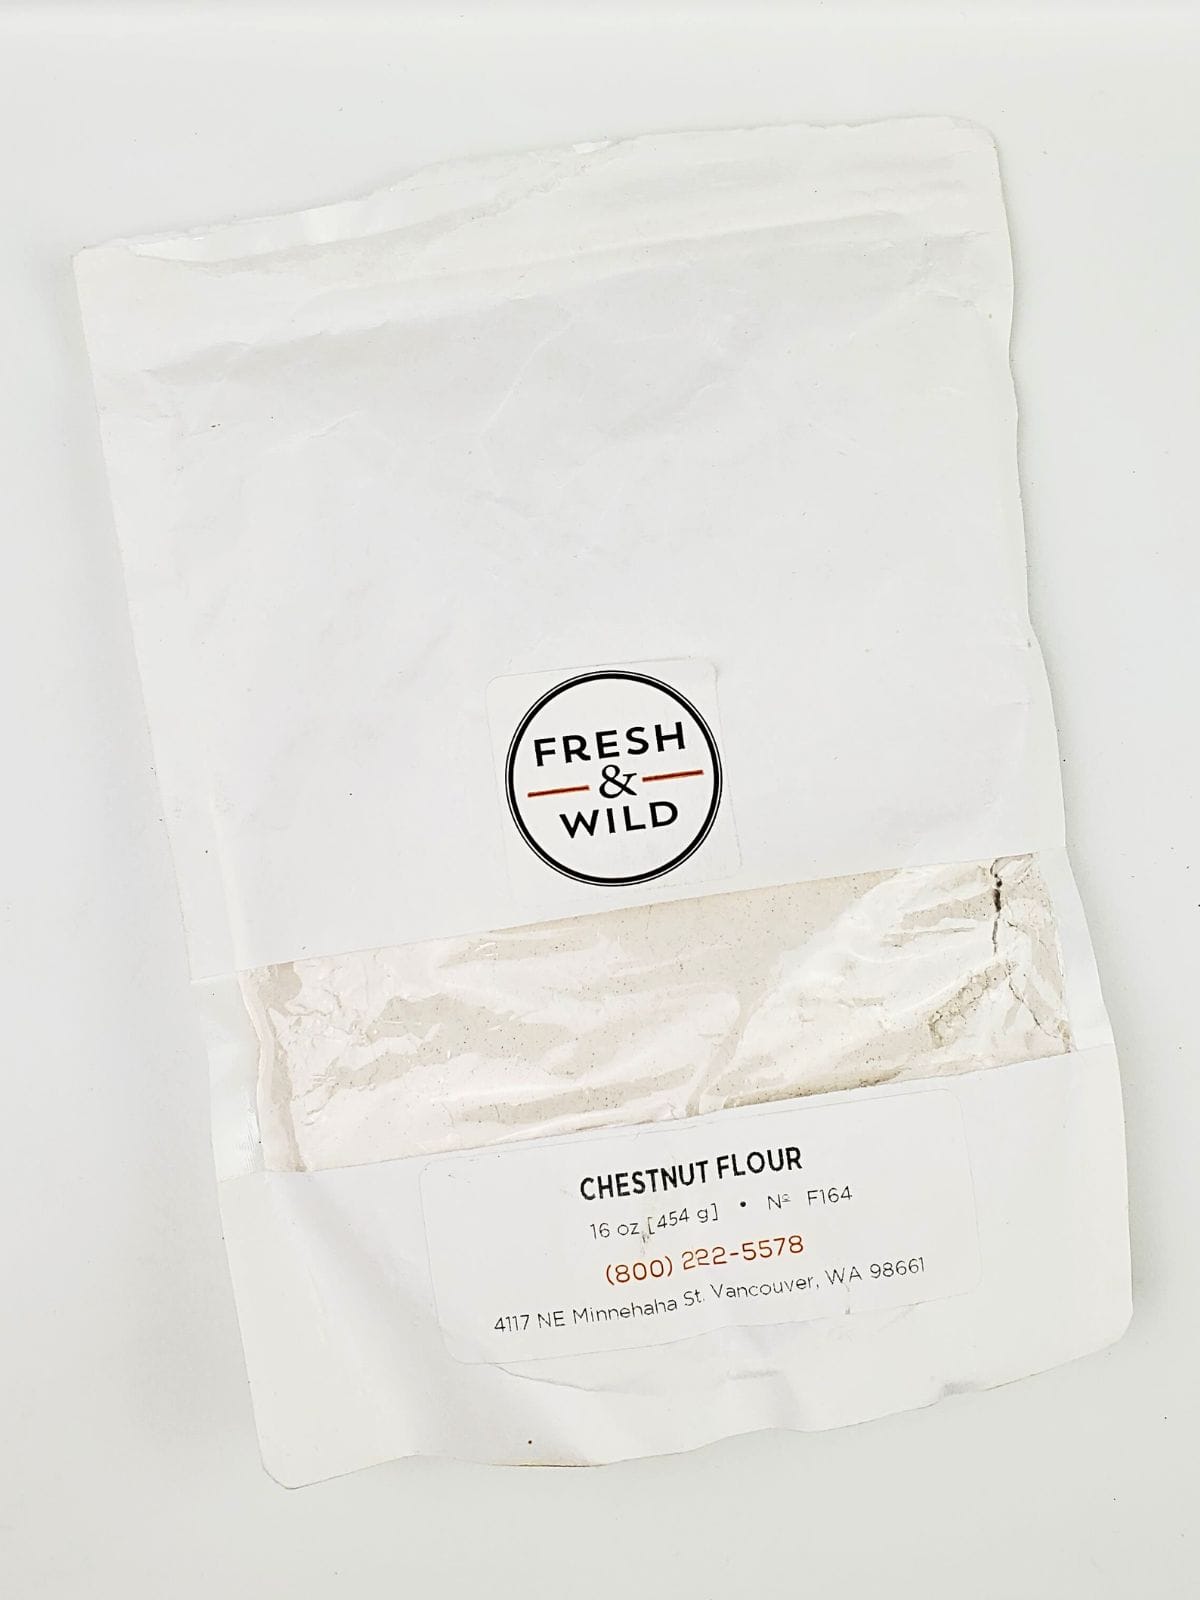 a pack of 16 oz. of chestnut flour from Fresh & Wild.